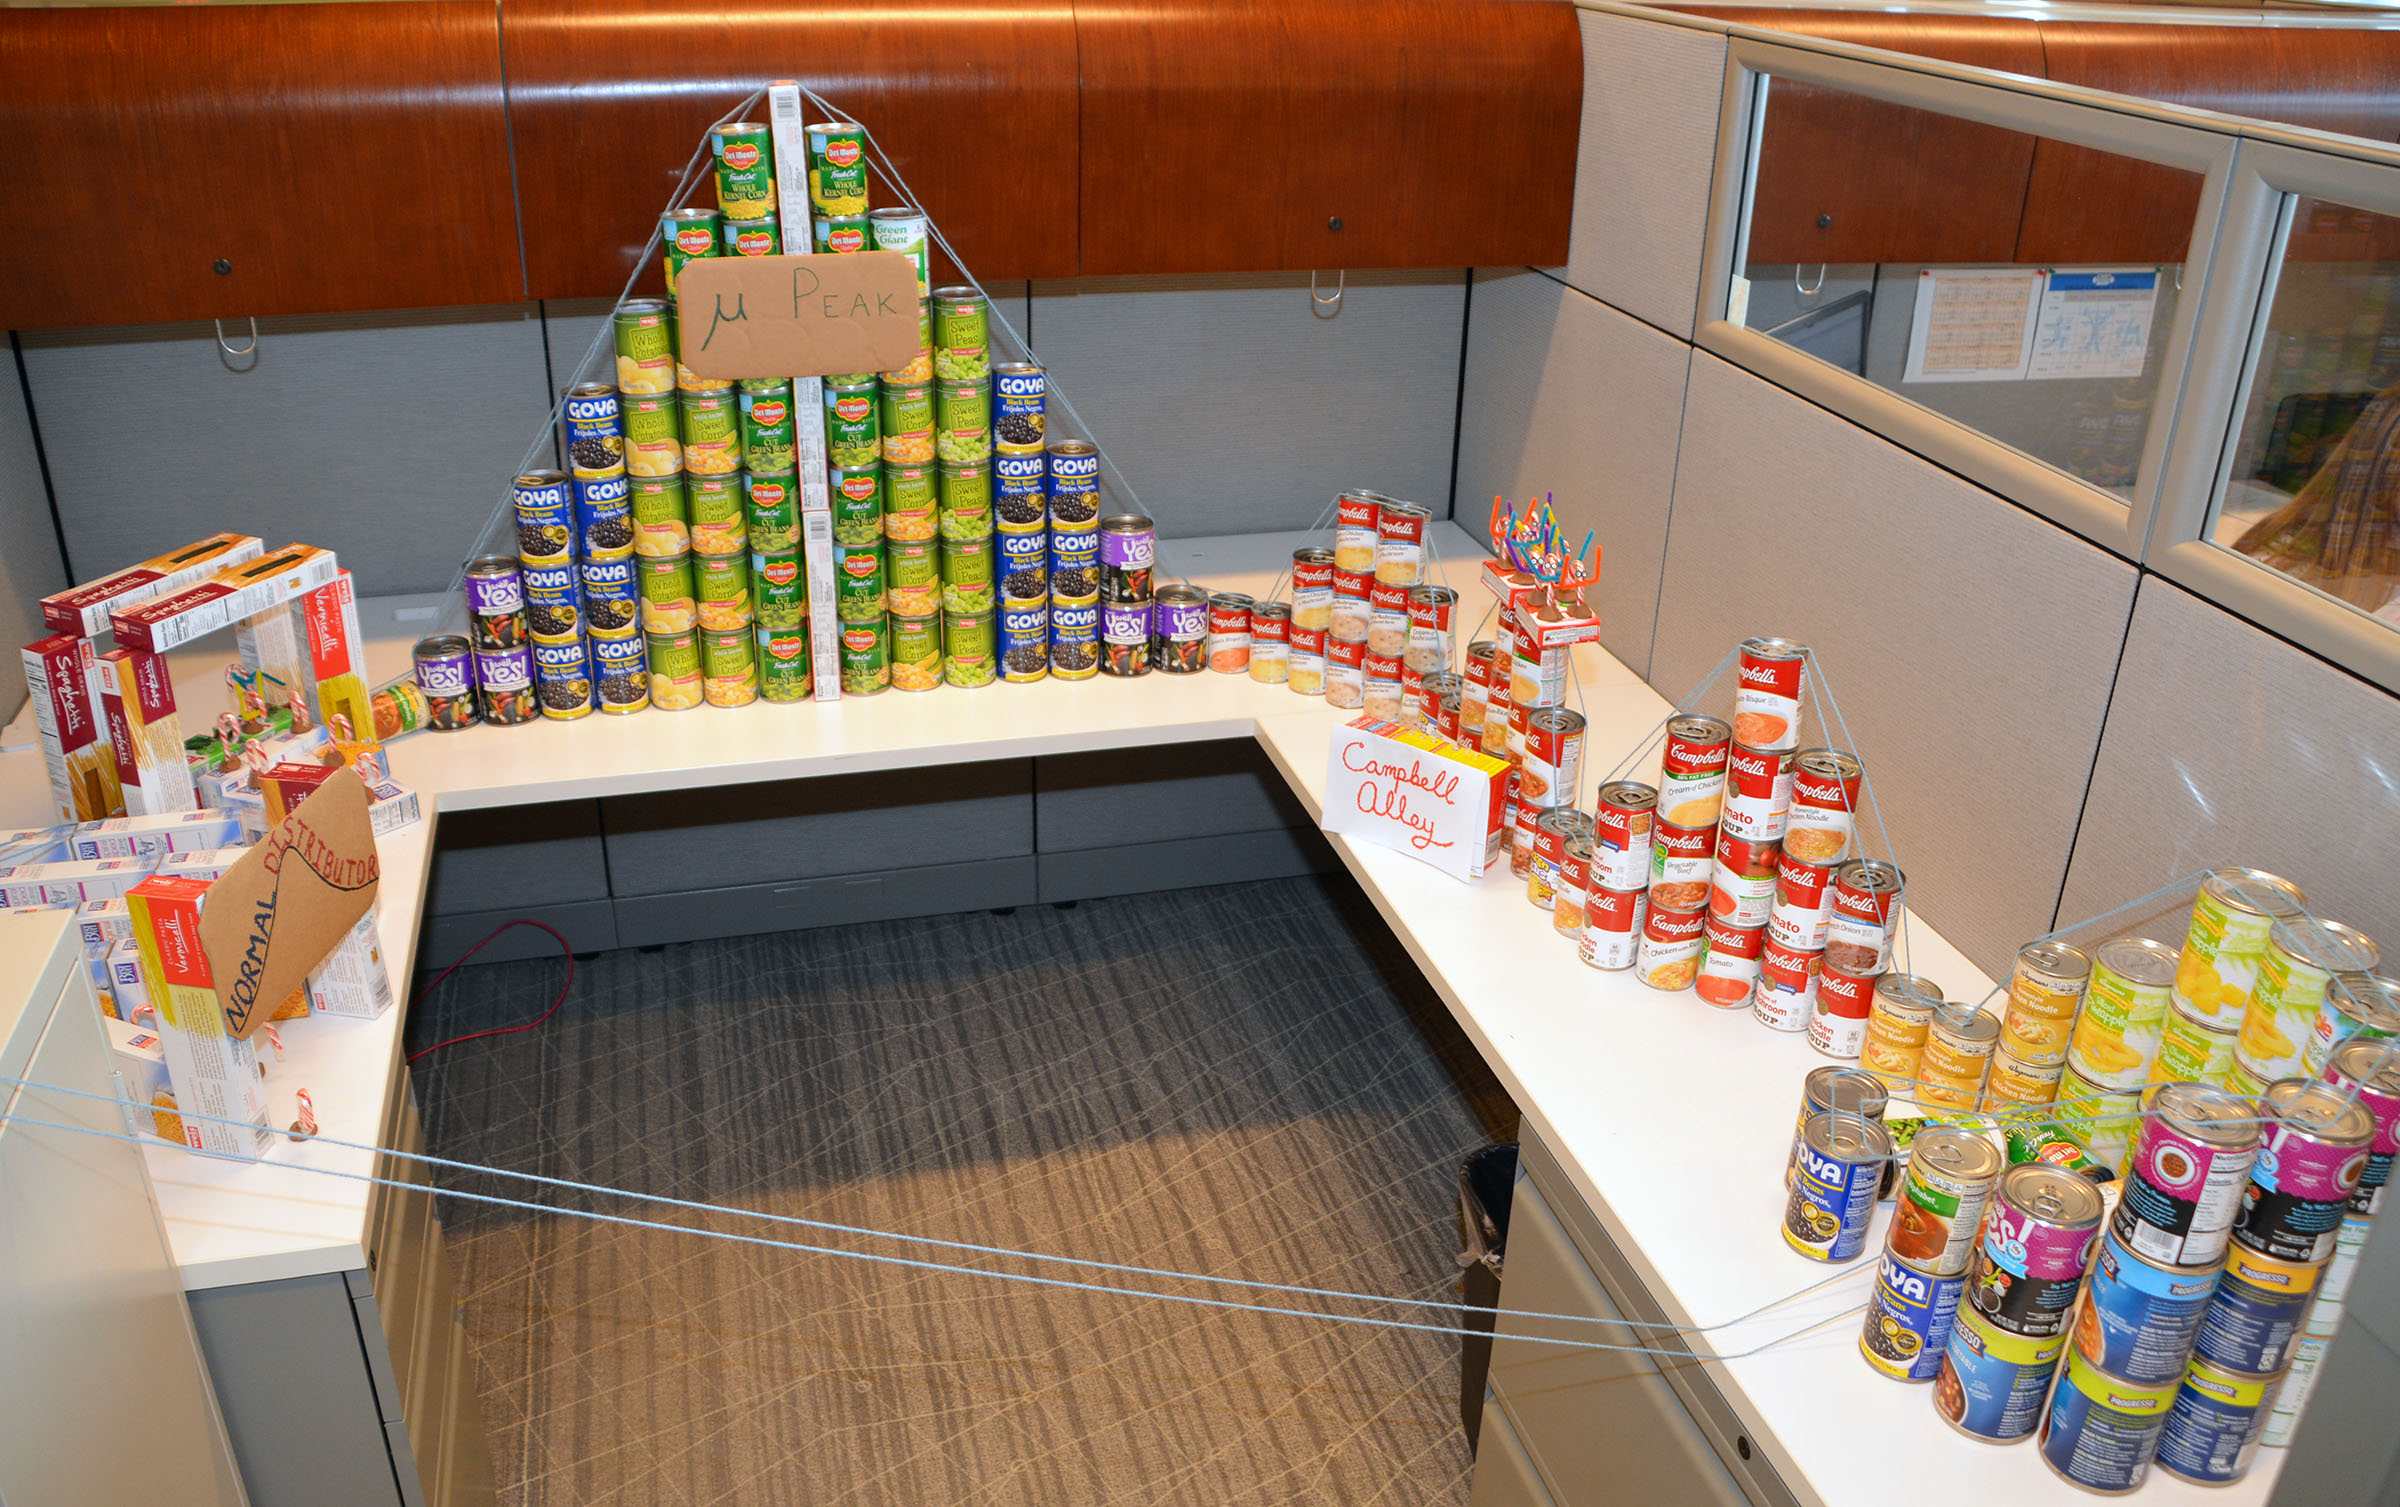 A tableau of cans demonstrating statistical concepts for the 2019 CFC CANstruction Food Drive at the Census Bureau